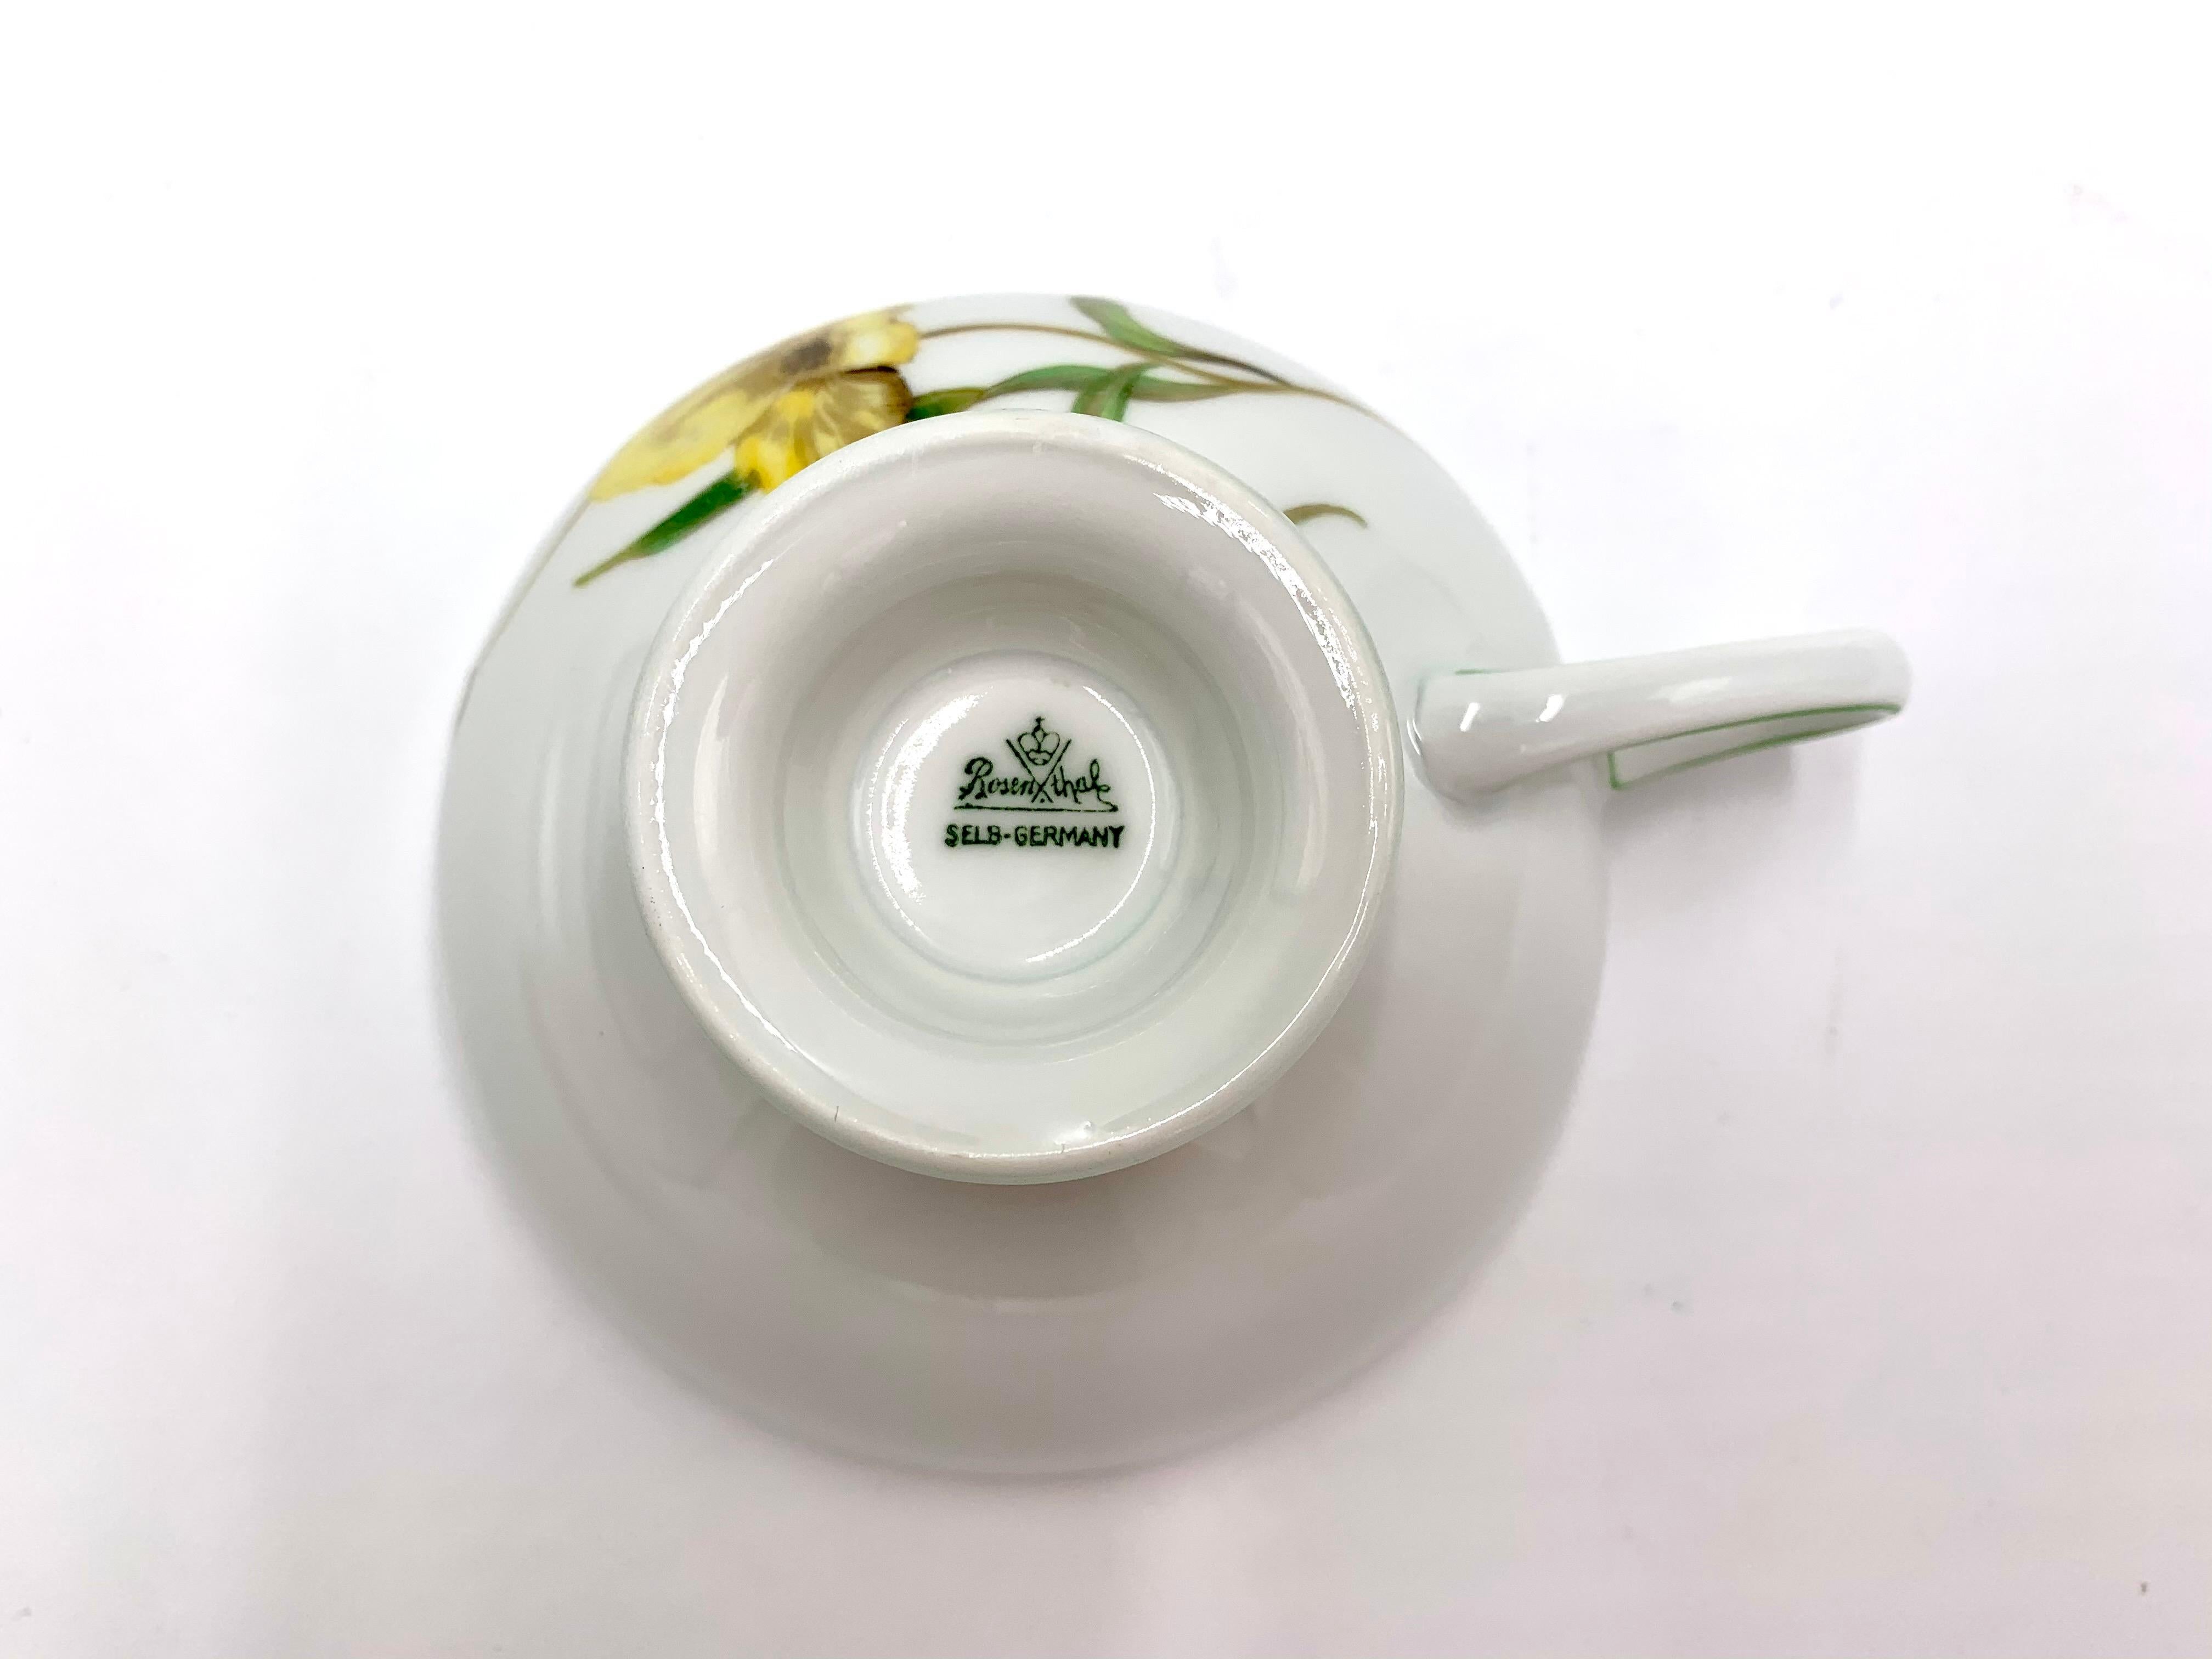 Porcelain Cup with Daffodil Rosenthal, Breakfast Set, Germany 1